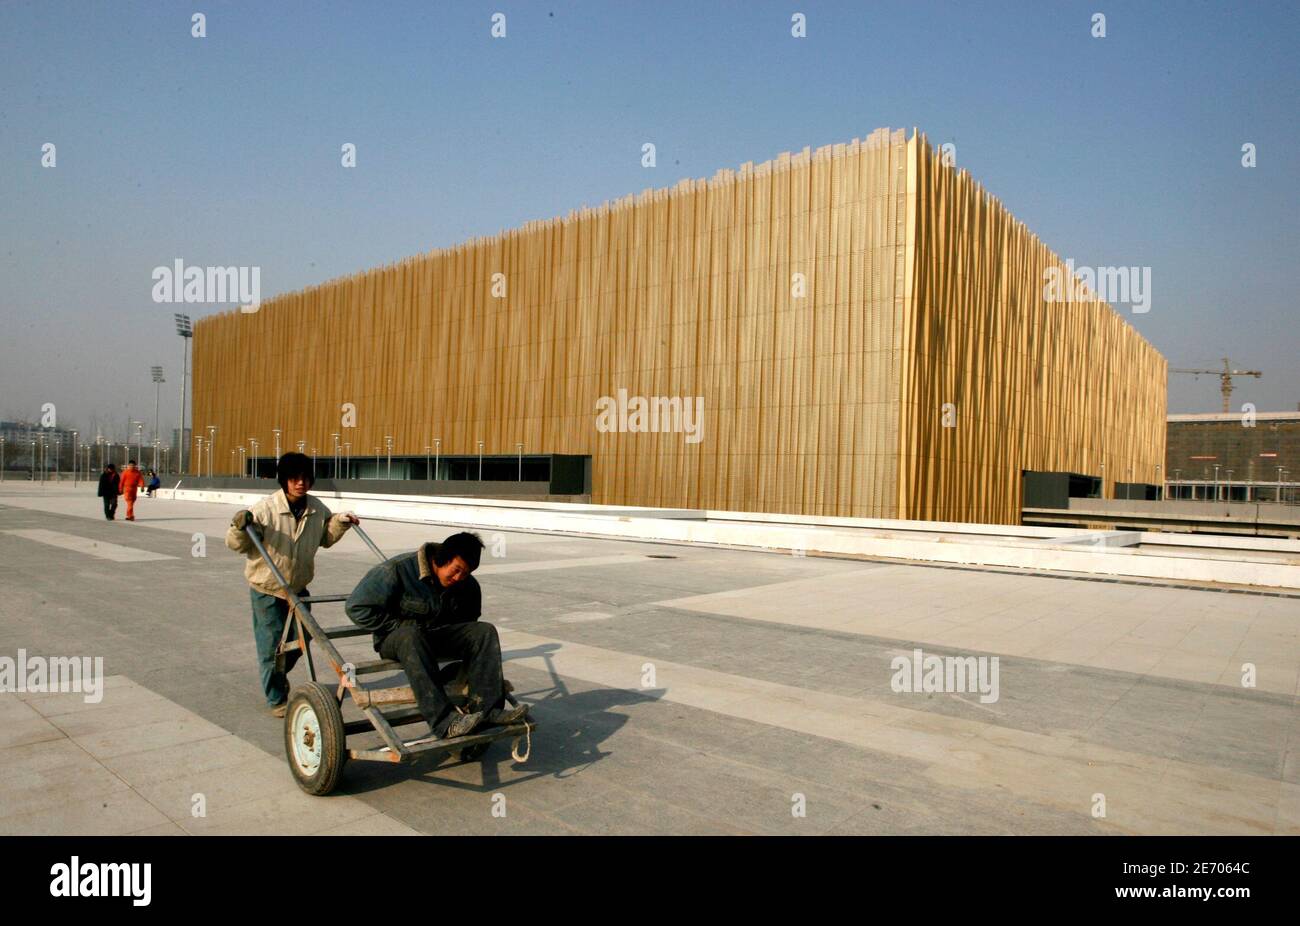 A worker carries a trolley past the Beijing Olympic Basketball Gymnasium in Beijing January 15, 2008. The 18,000-seat venue has been shrouded in straw-coloured aluminium after officials decided at the last moment that the jade-coloured frosted opaque glass of the original design was 'dull and tedious'.  Picture taken on  January 15, 2008. REUTERS/Jason Lee (CHINA) Stock Photo